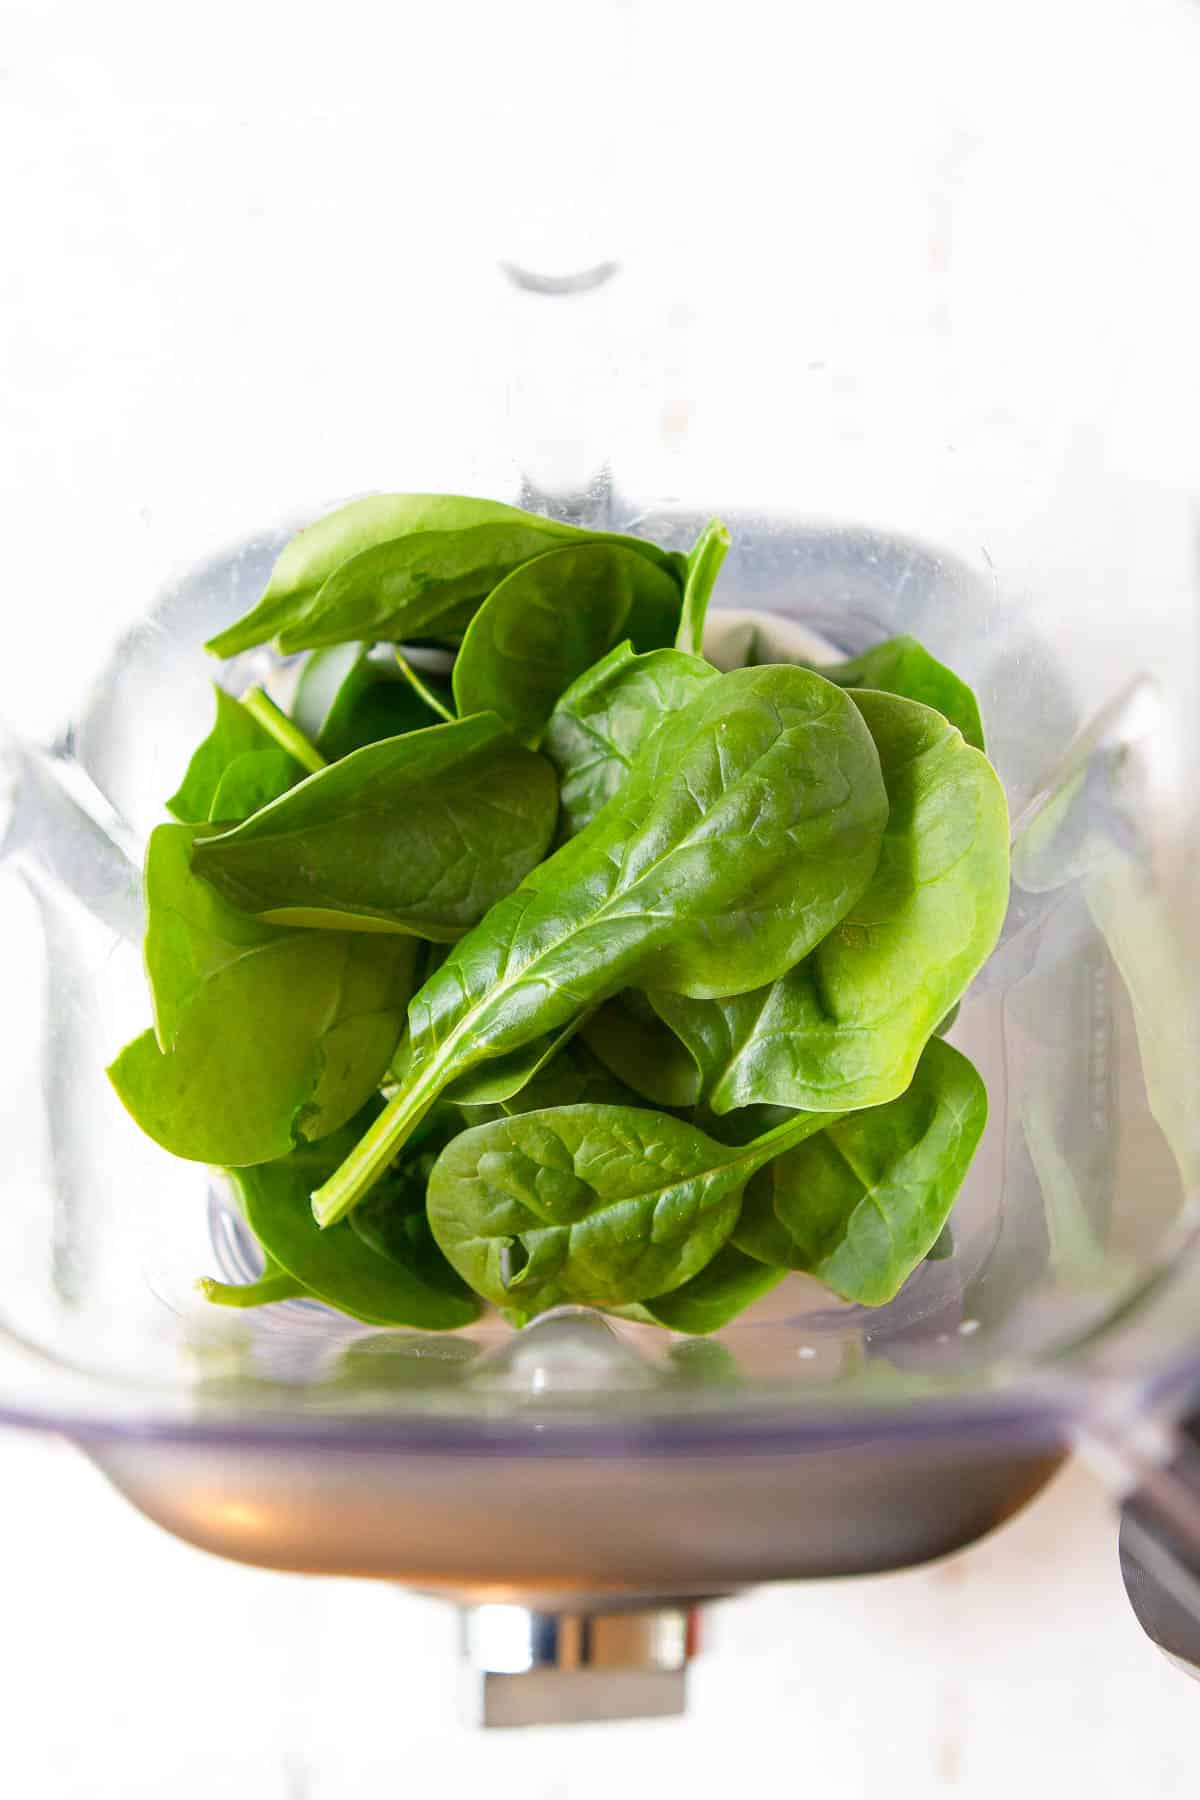 Spinach leaves in a blender.